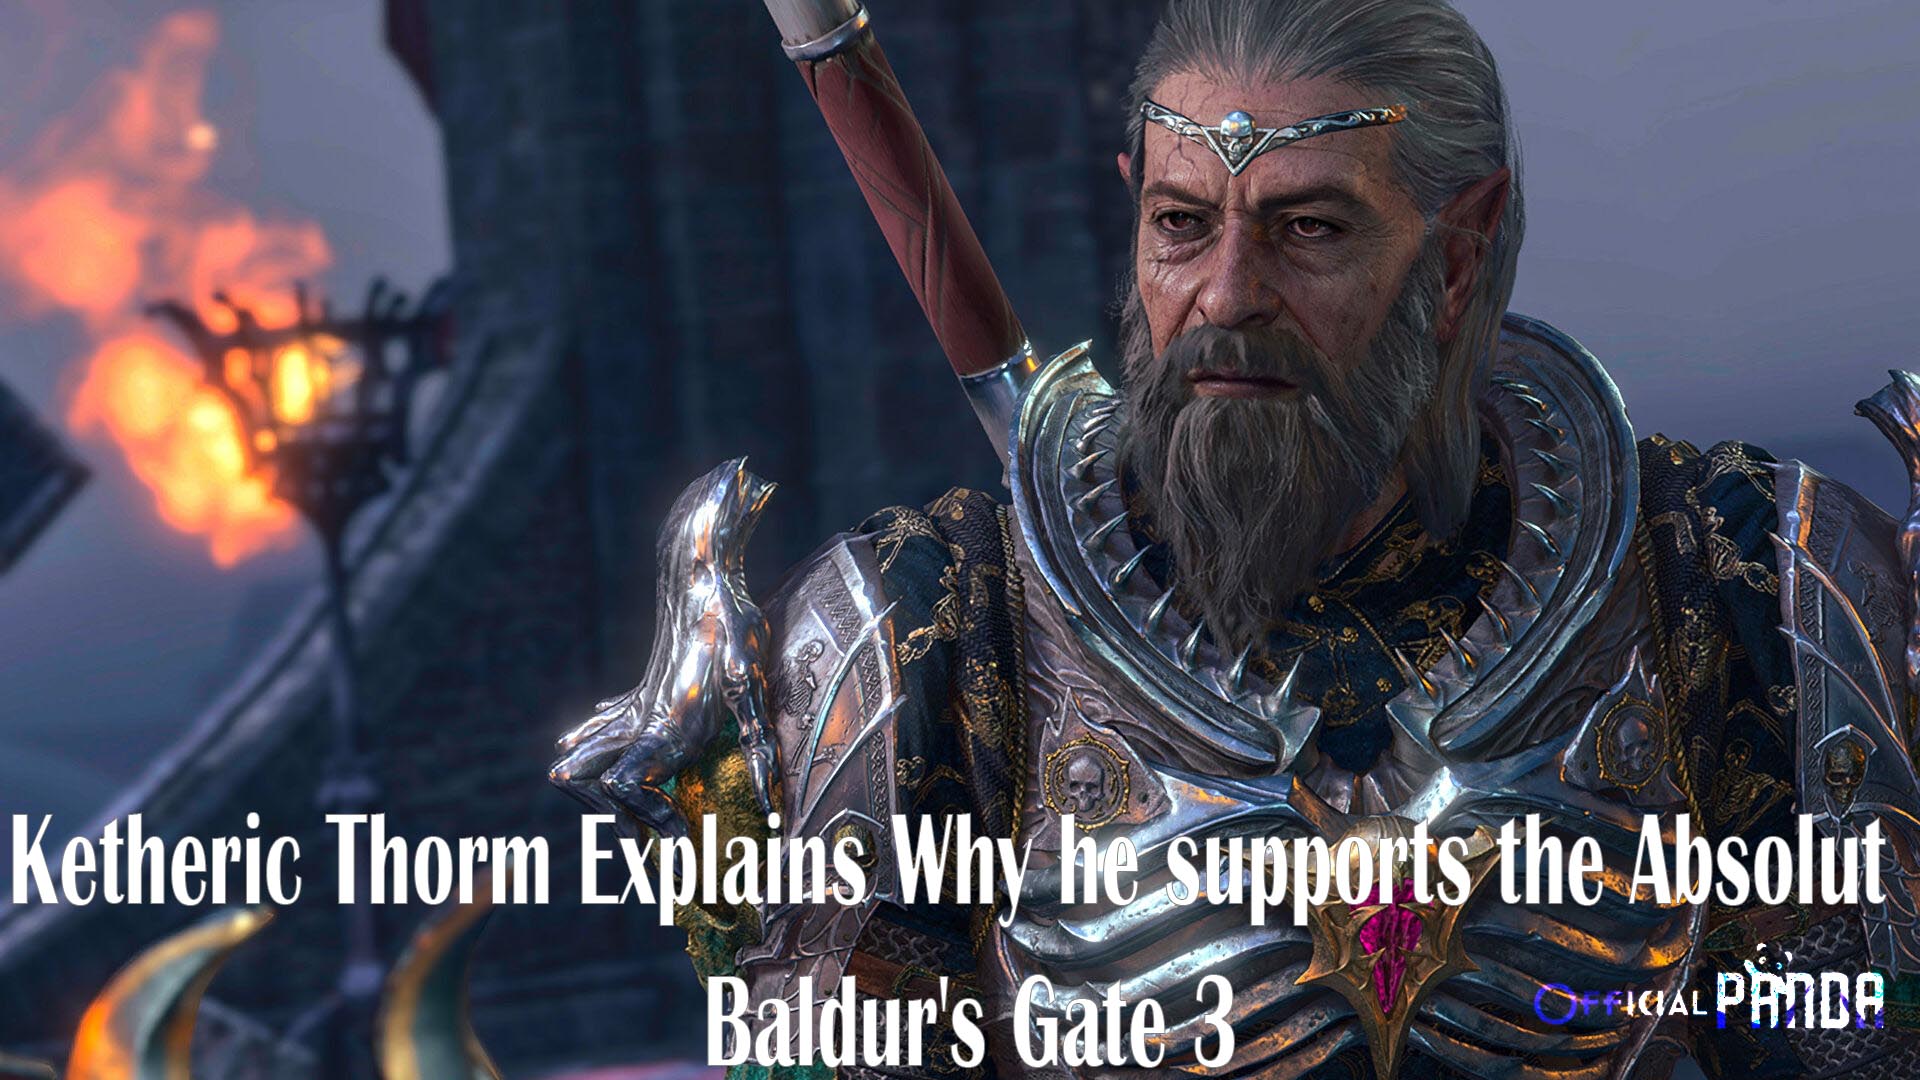 Ketheric Thorm Explains Why he supports the Absolut | Baldur's Gate 3